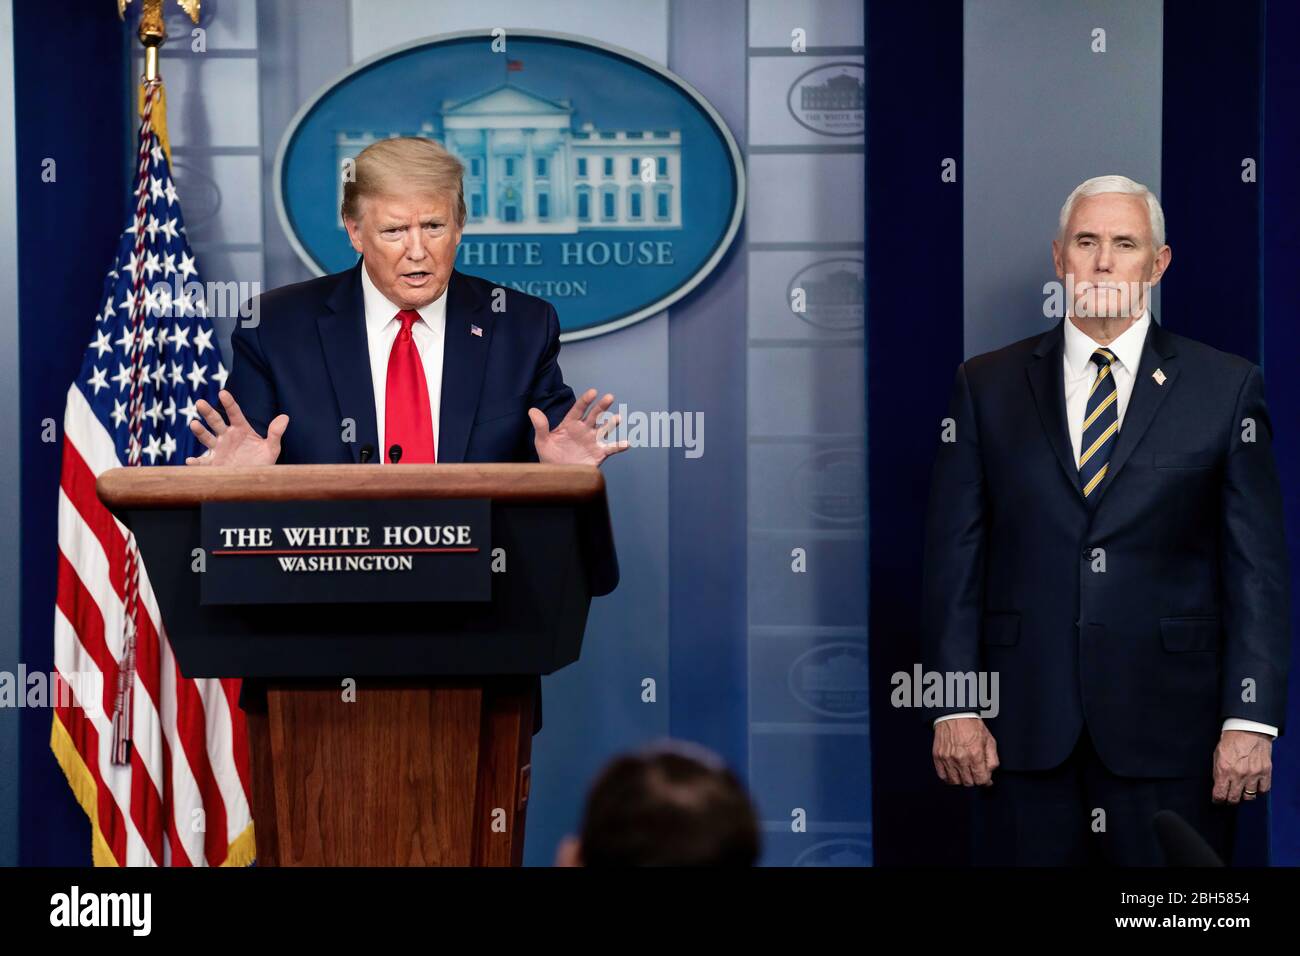 White House Coronavirus Update Briefing President Donald J. Trump, joined by Vice President Mike Pence, addresses his remarks at a coronavirus update briefing Wednesday, April 22, 2020, in the James S. Brady White House Press Briefing Room of the White House. Stock Photo